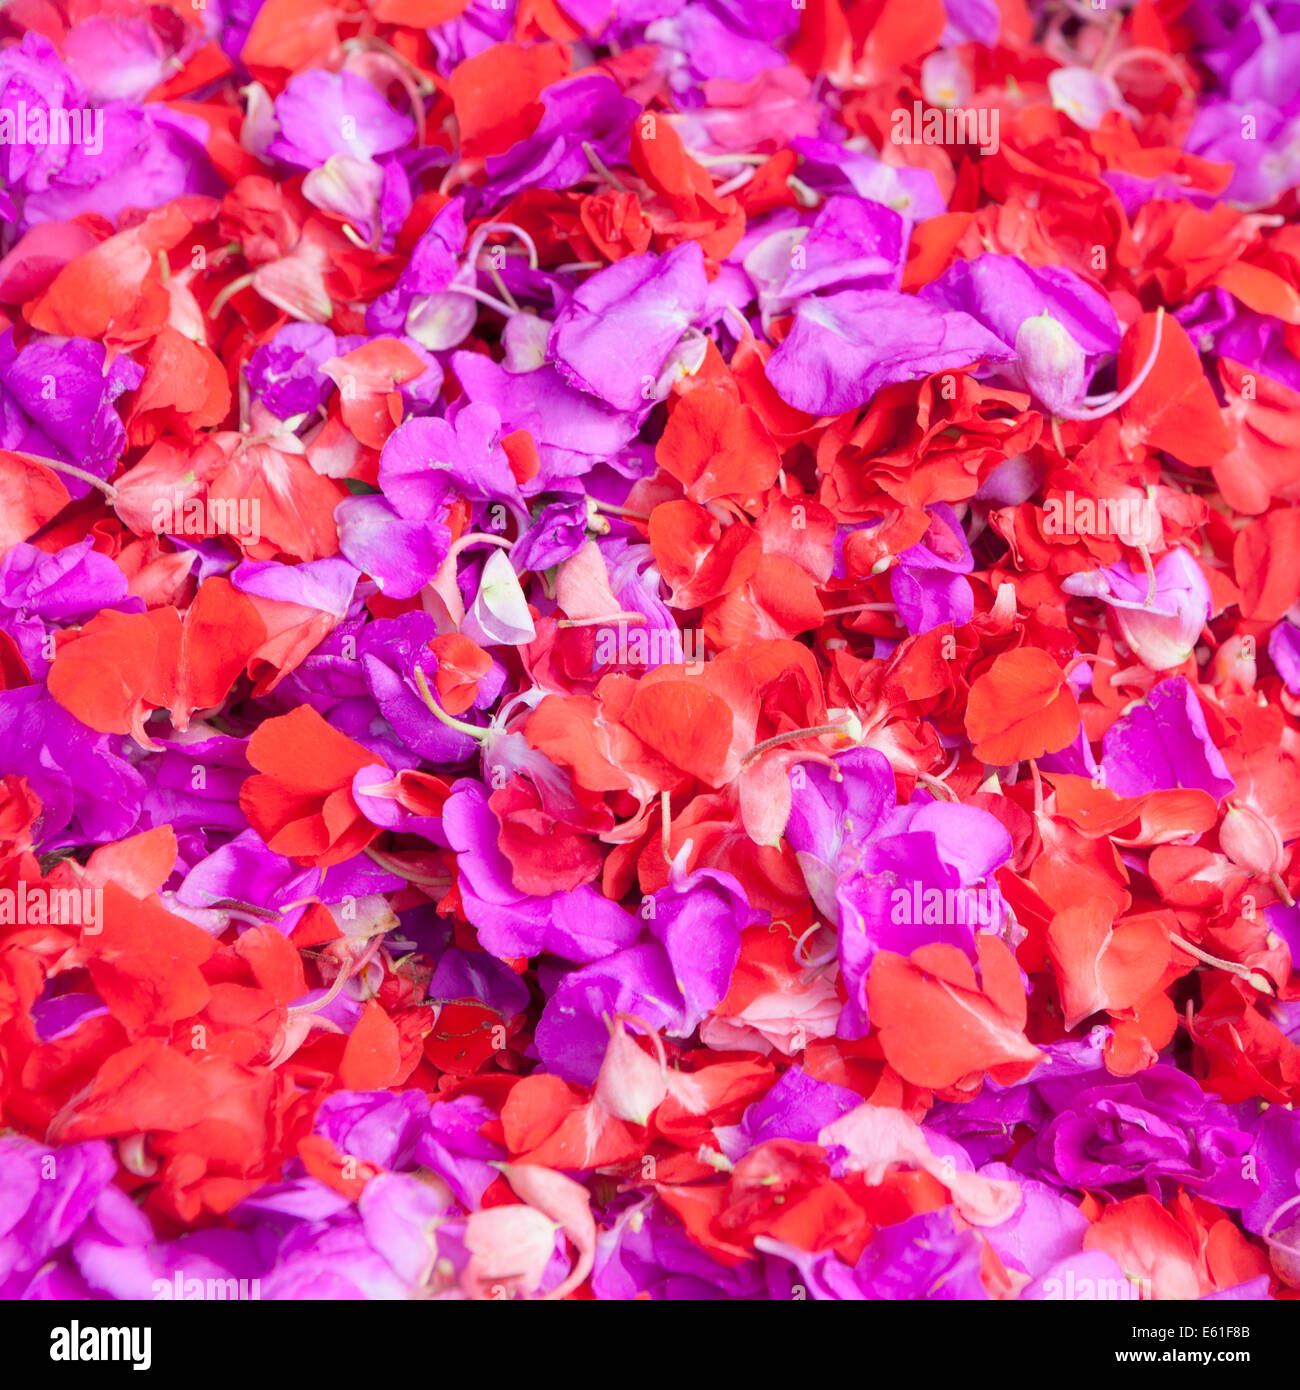 Red and purple petals Stock Photo